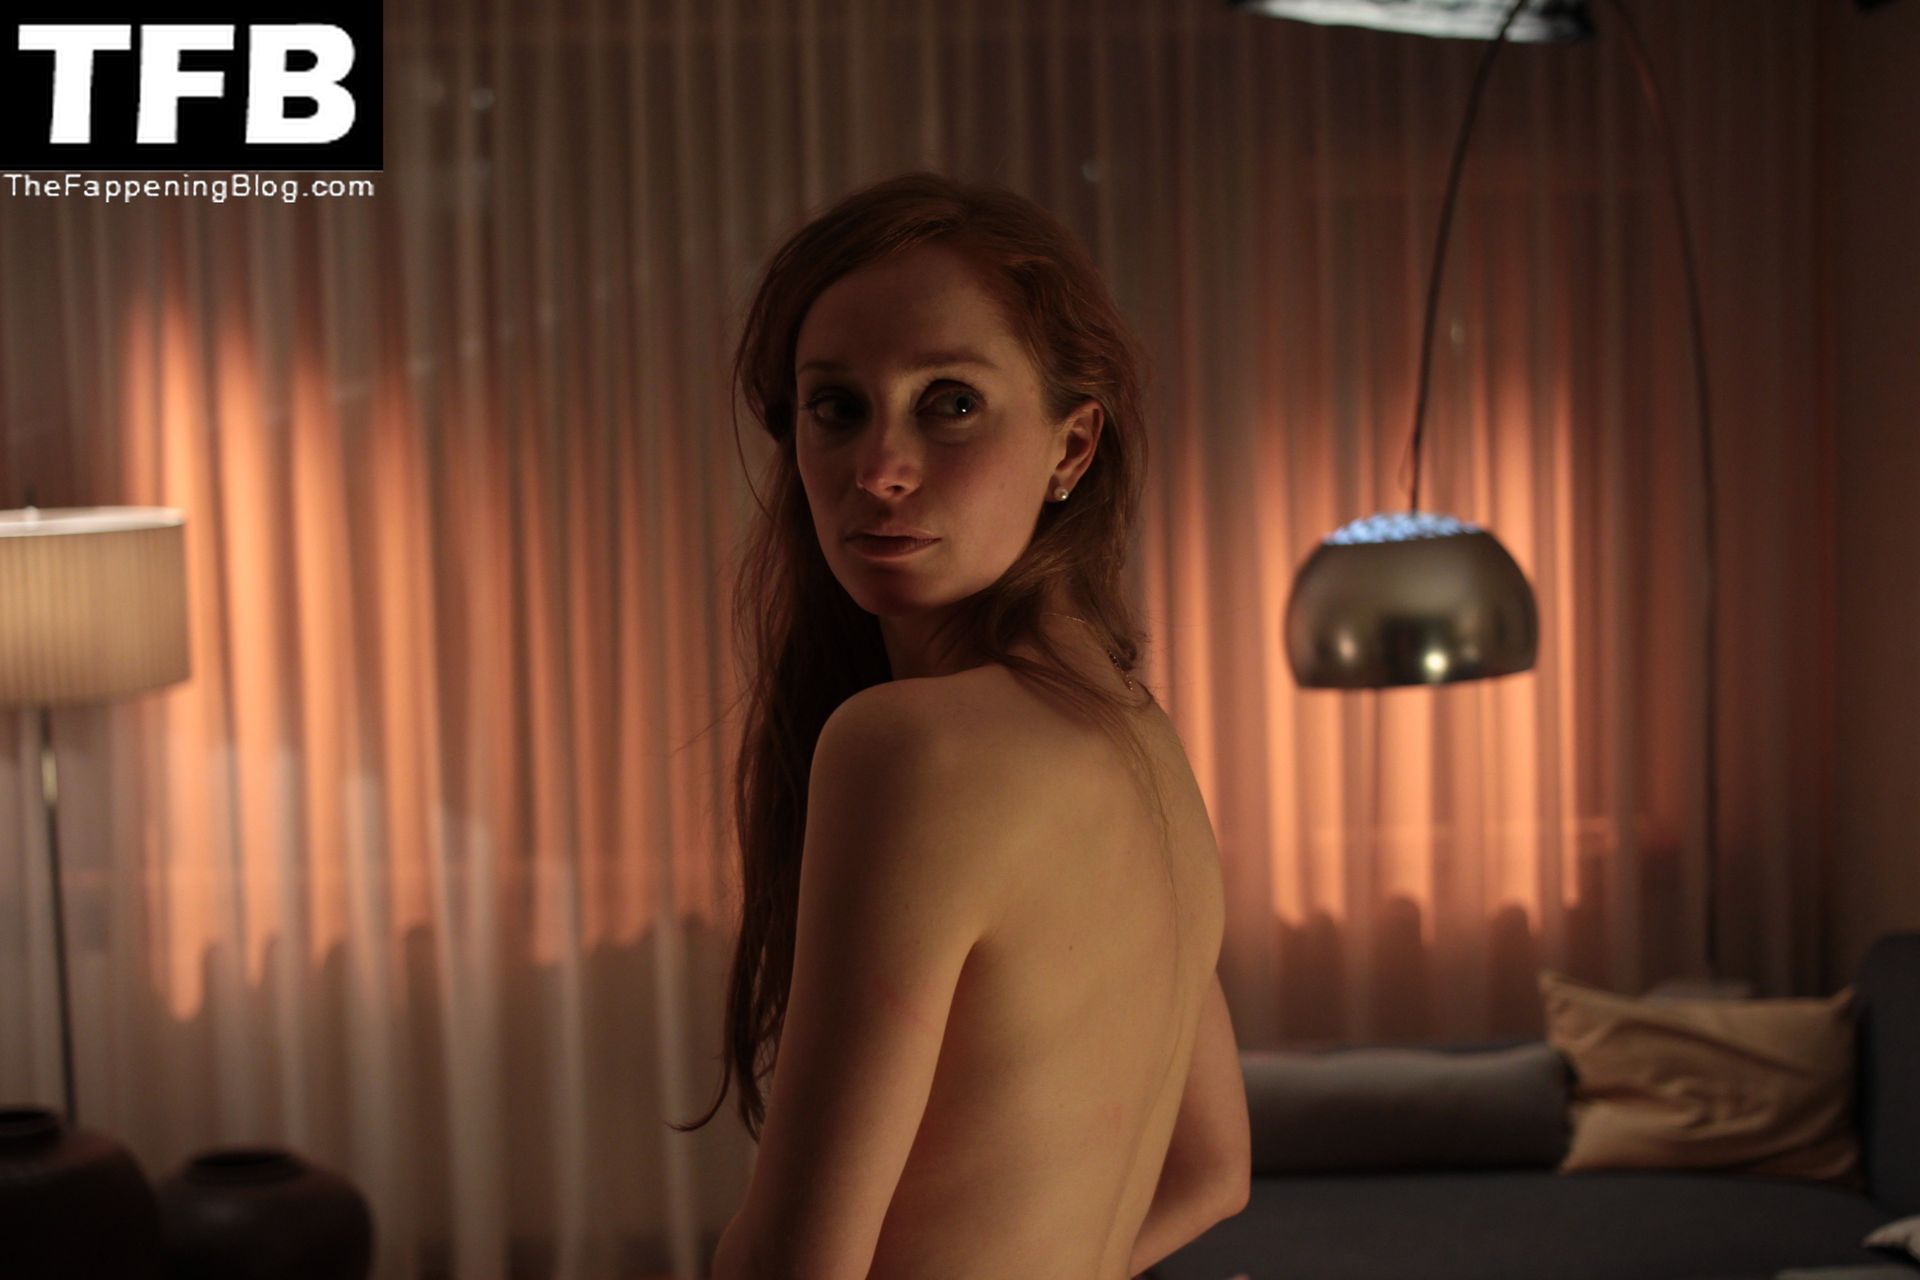 Look at Lotte Verbeek’s sexy "Me in My Place" photos and screensh...